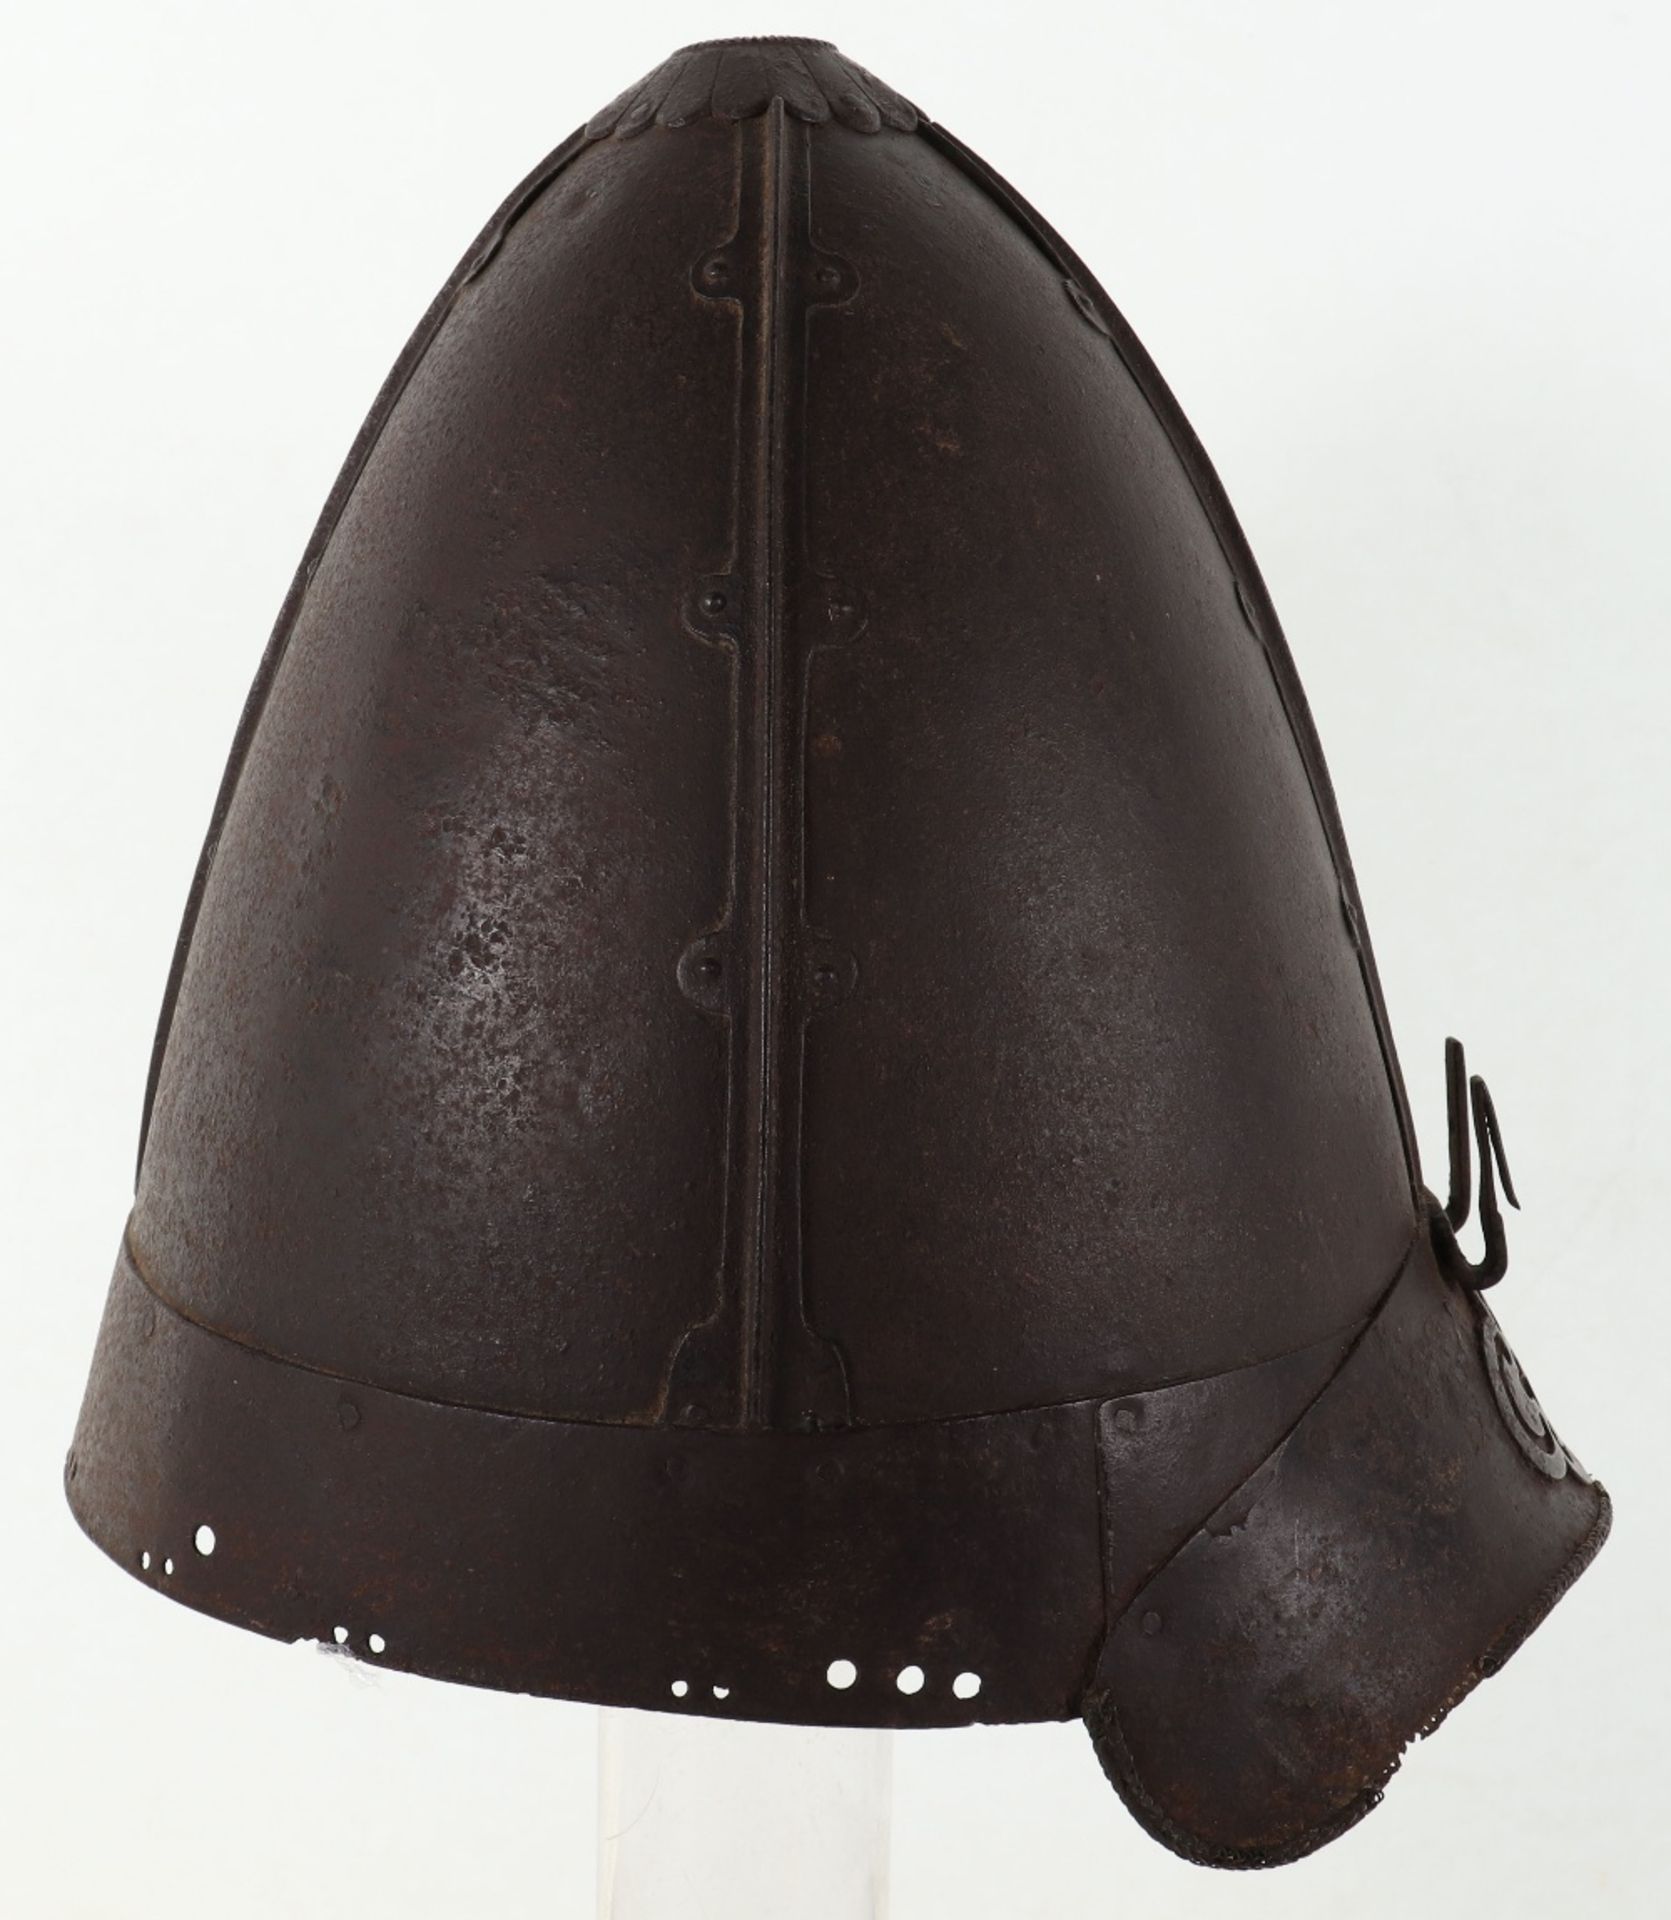 Rare Possibly Early Japanese Helmet Kabuto in the Korean Fashion - Image 7 of 12